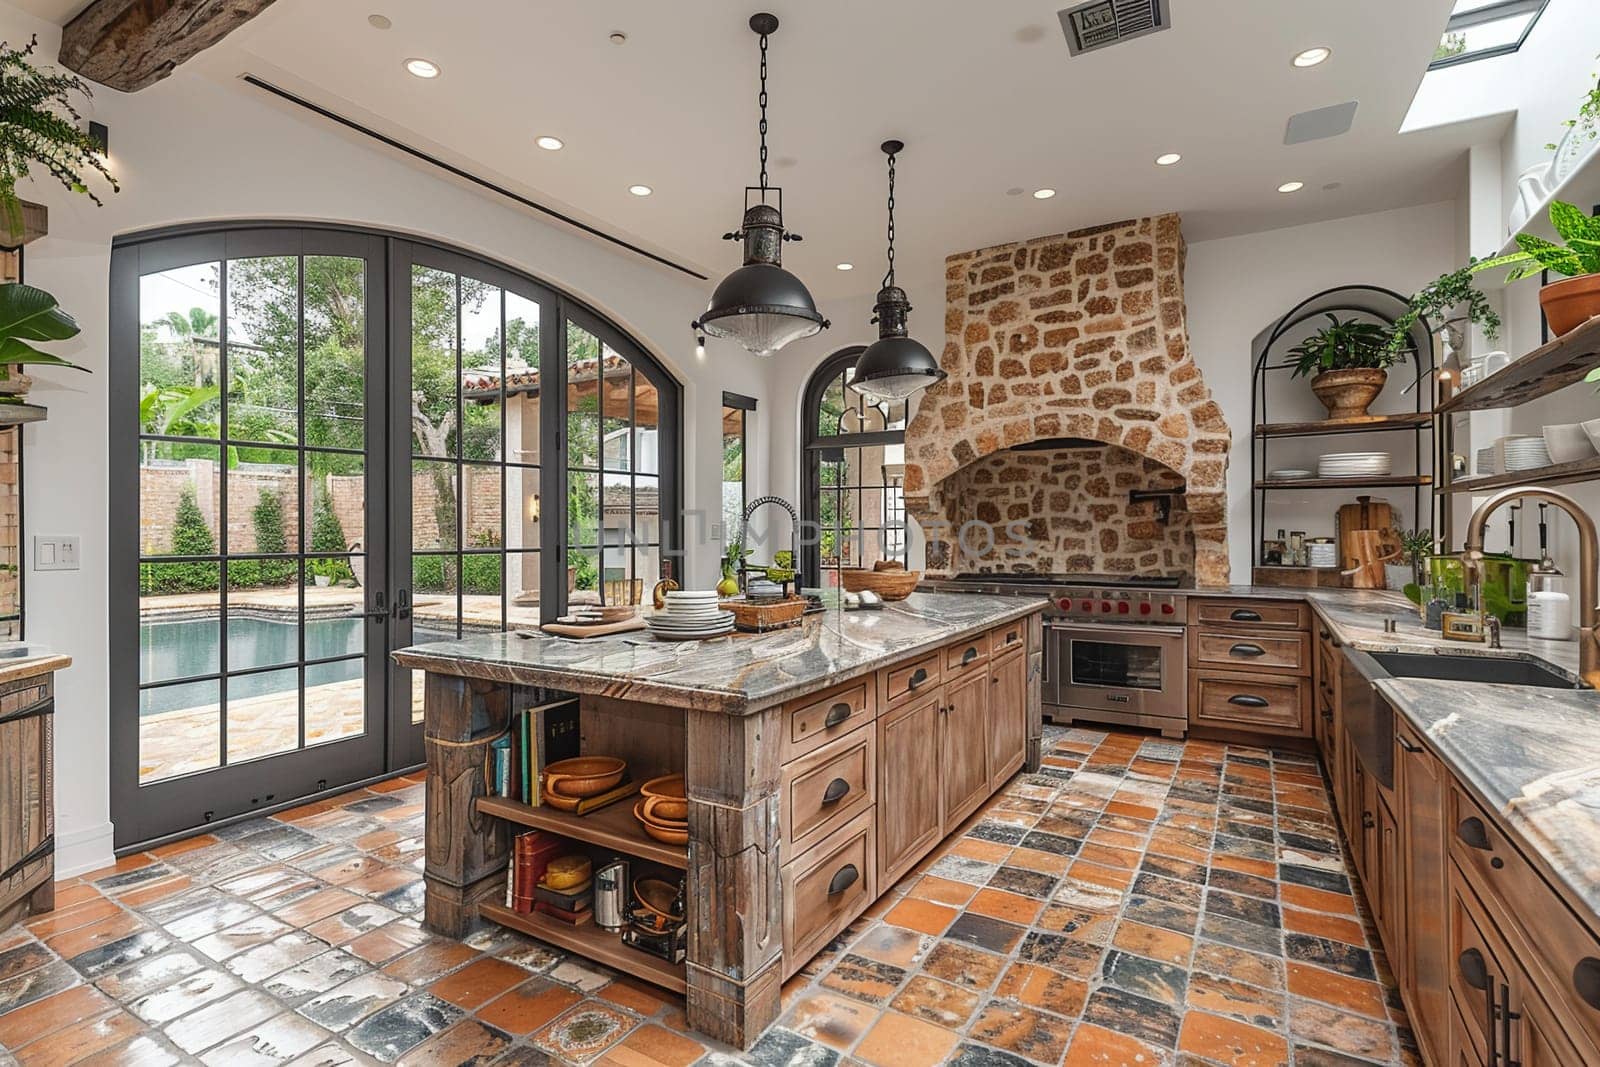 Mediterranean-style kitchen with terracotta tiles and iron accents by Benzoix